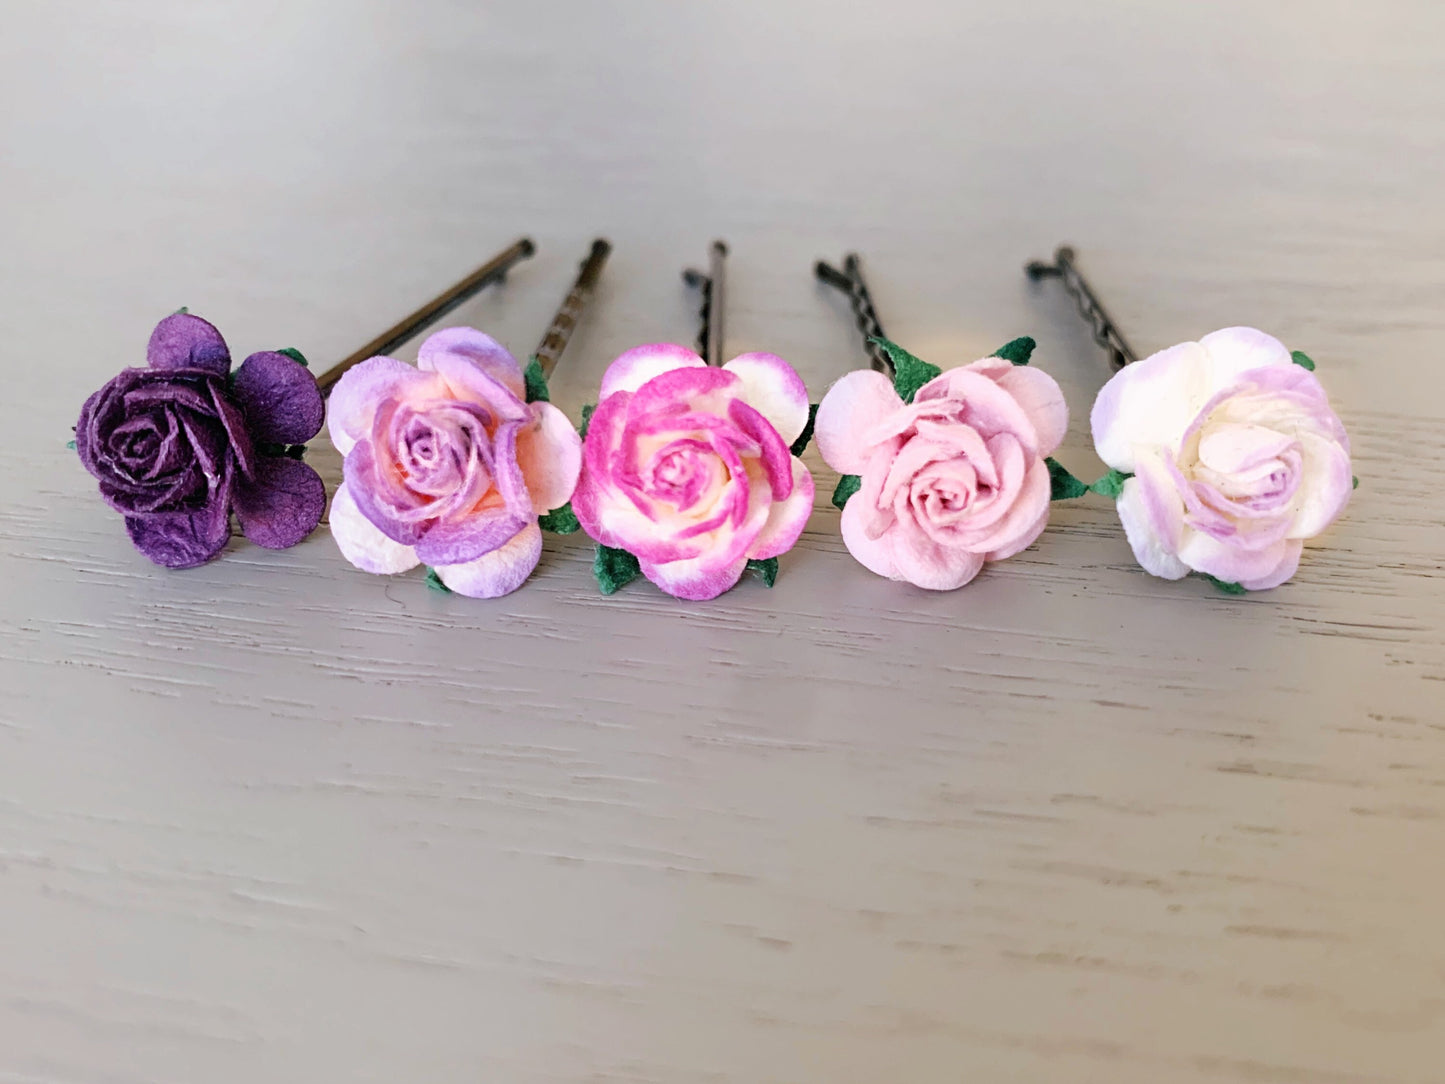 Purple Paper Rose Bobby Pin Set, Cute Small Hair Flowers Handmade Hair Accessories Ombre Hair Pins in Lavender, Pink, Wisteria, Plum, Lilac MPR6